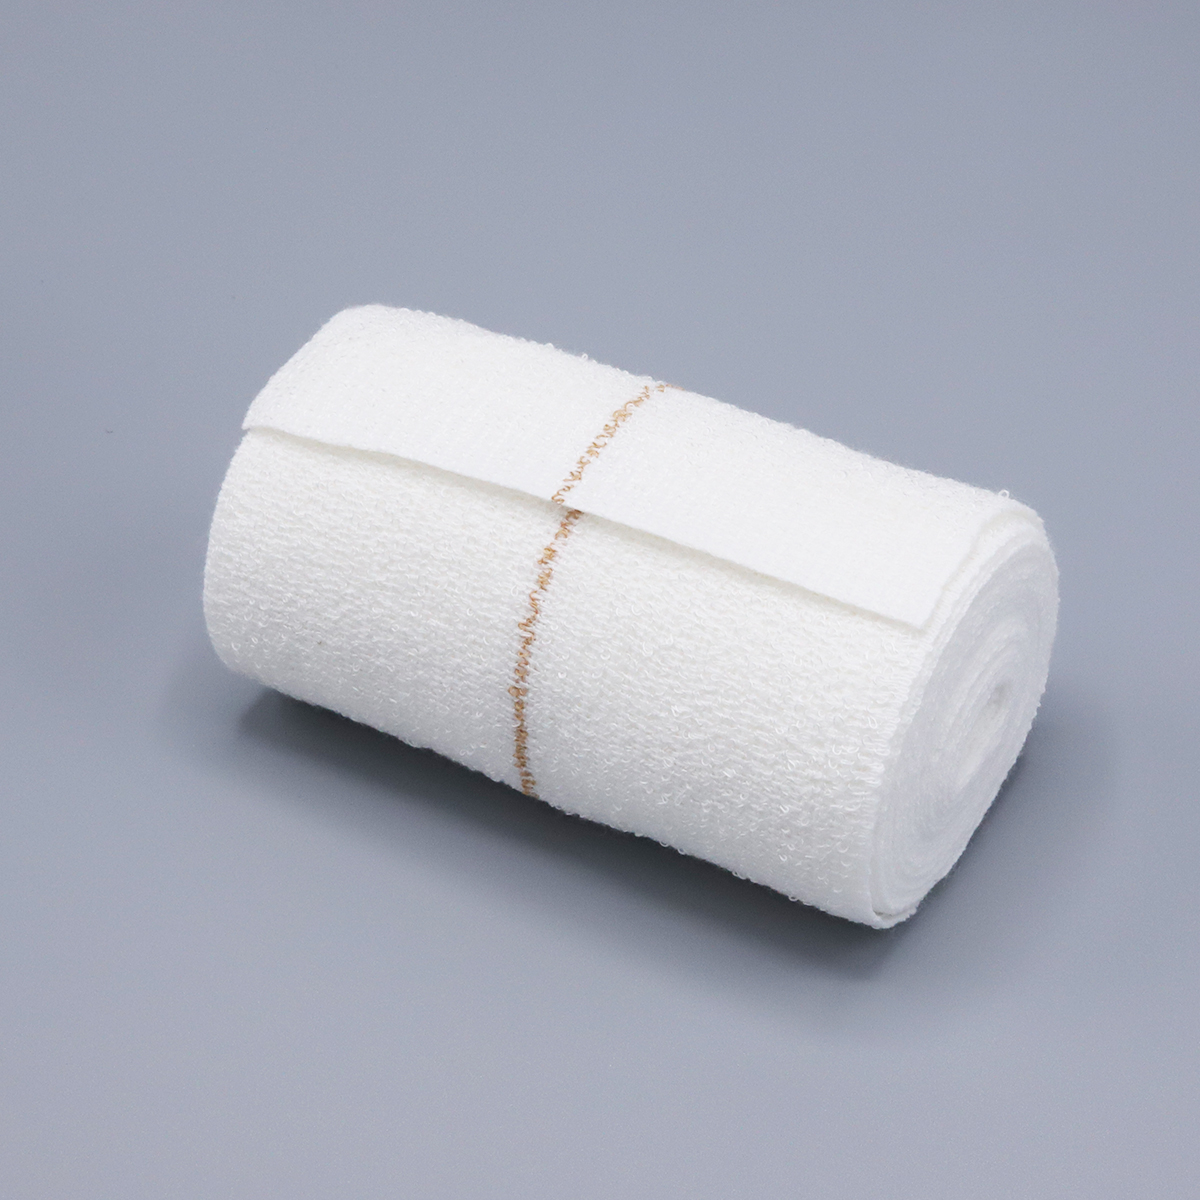 Type 3A Light Compression Stretched Bandage (Layer 3) for 4-Layer Kit (10cm  x 10.25m)